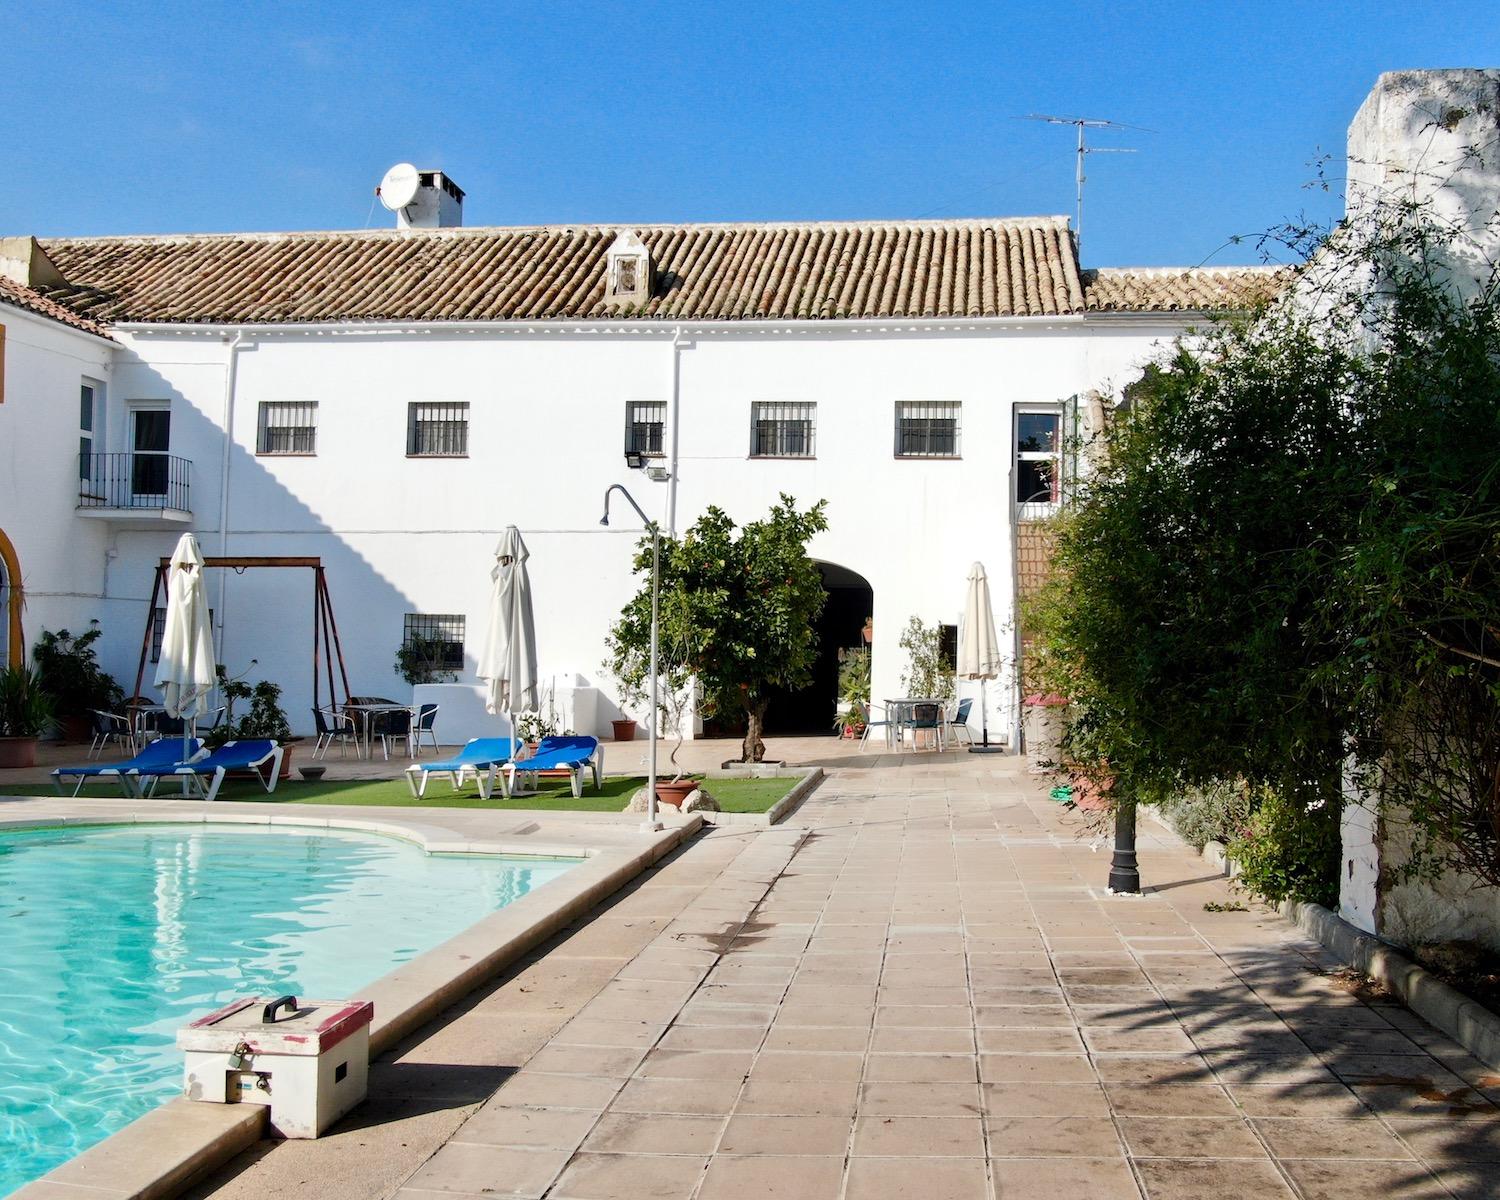 Authentic Andalucian Rural Hotel